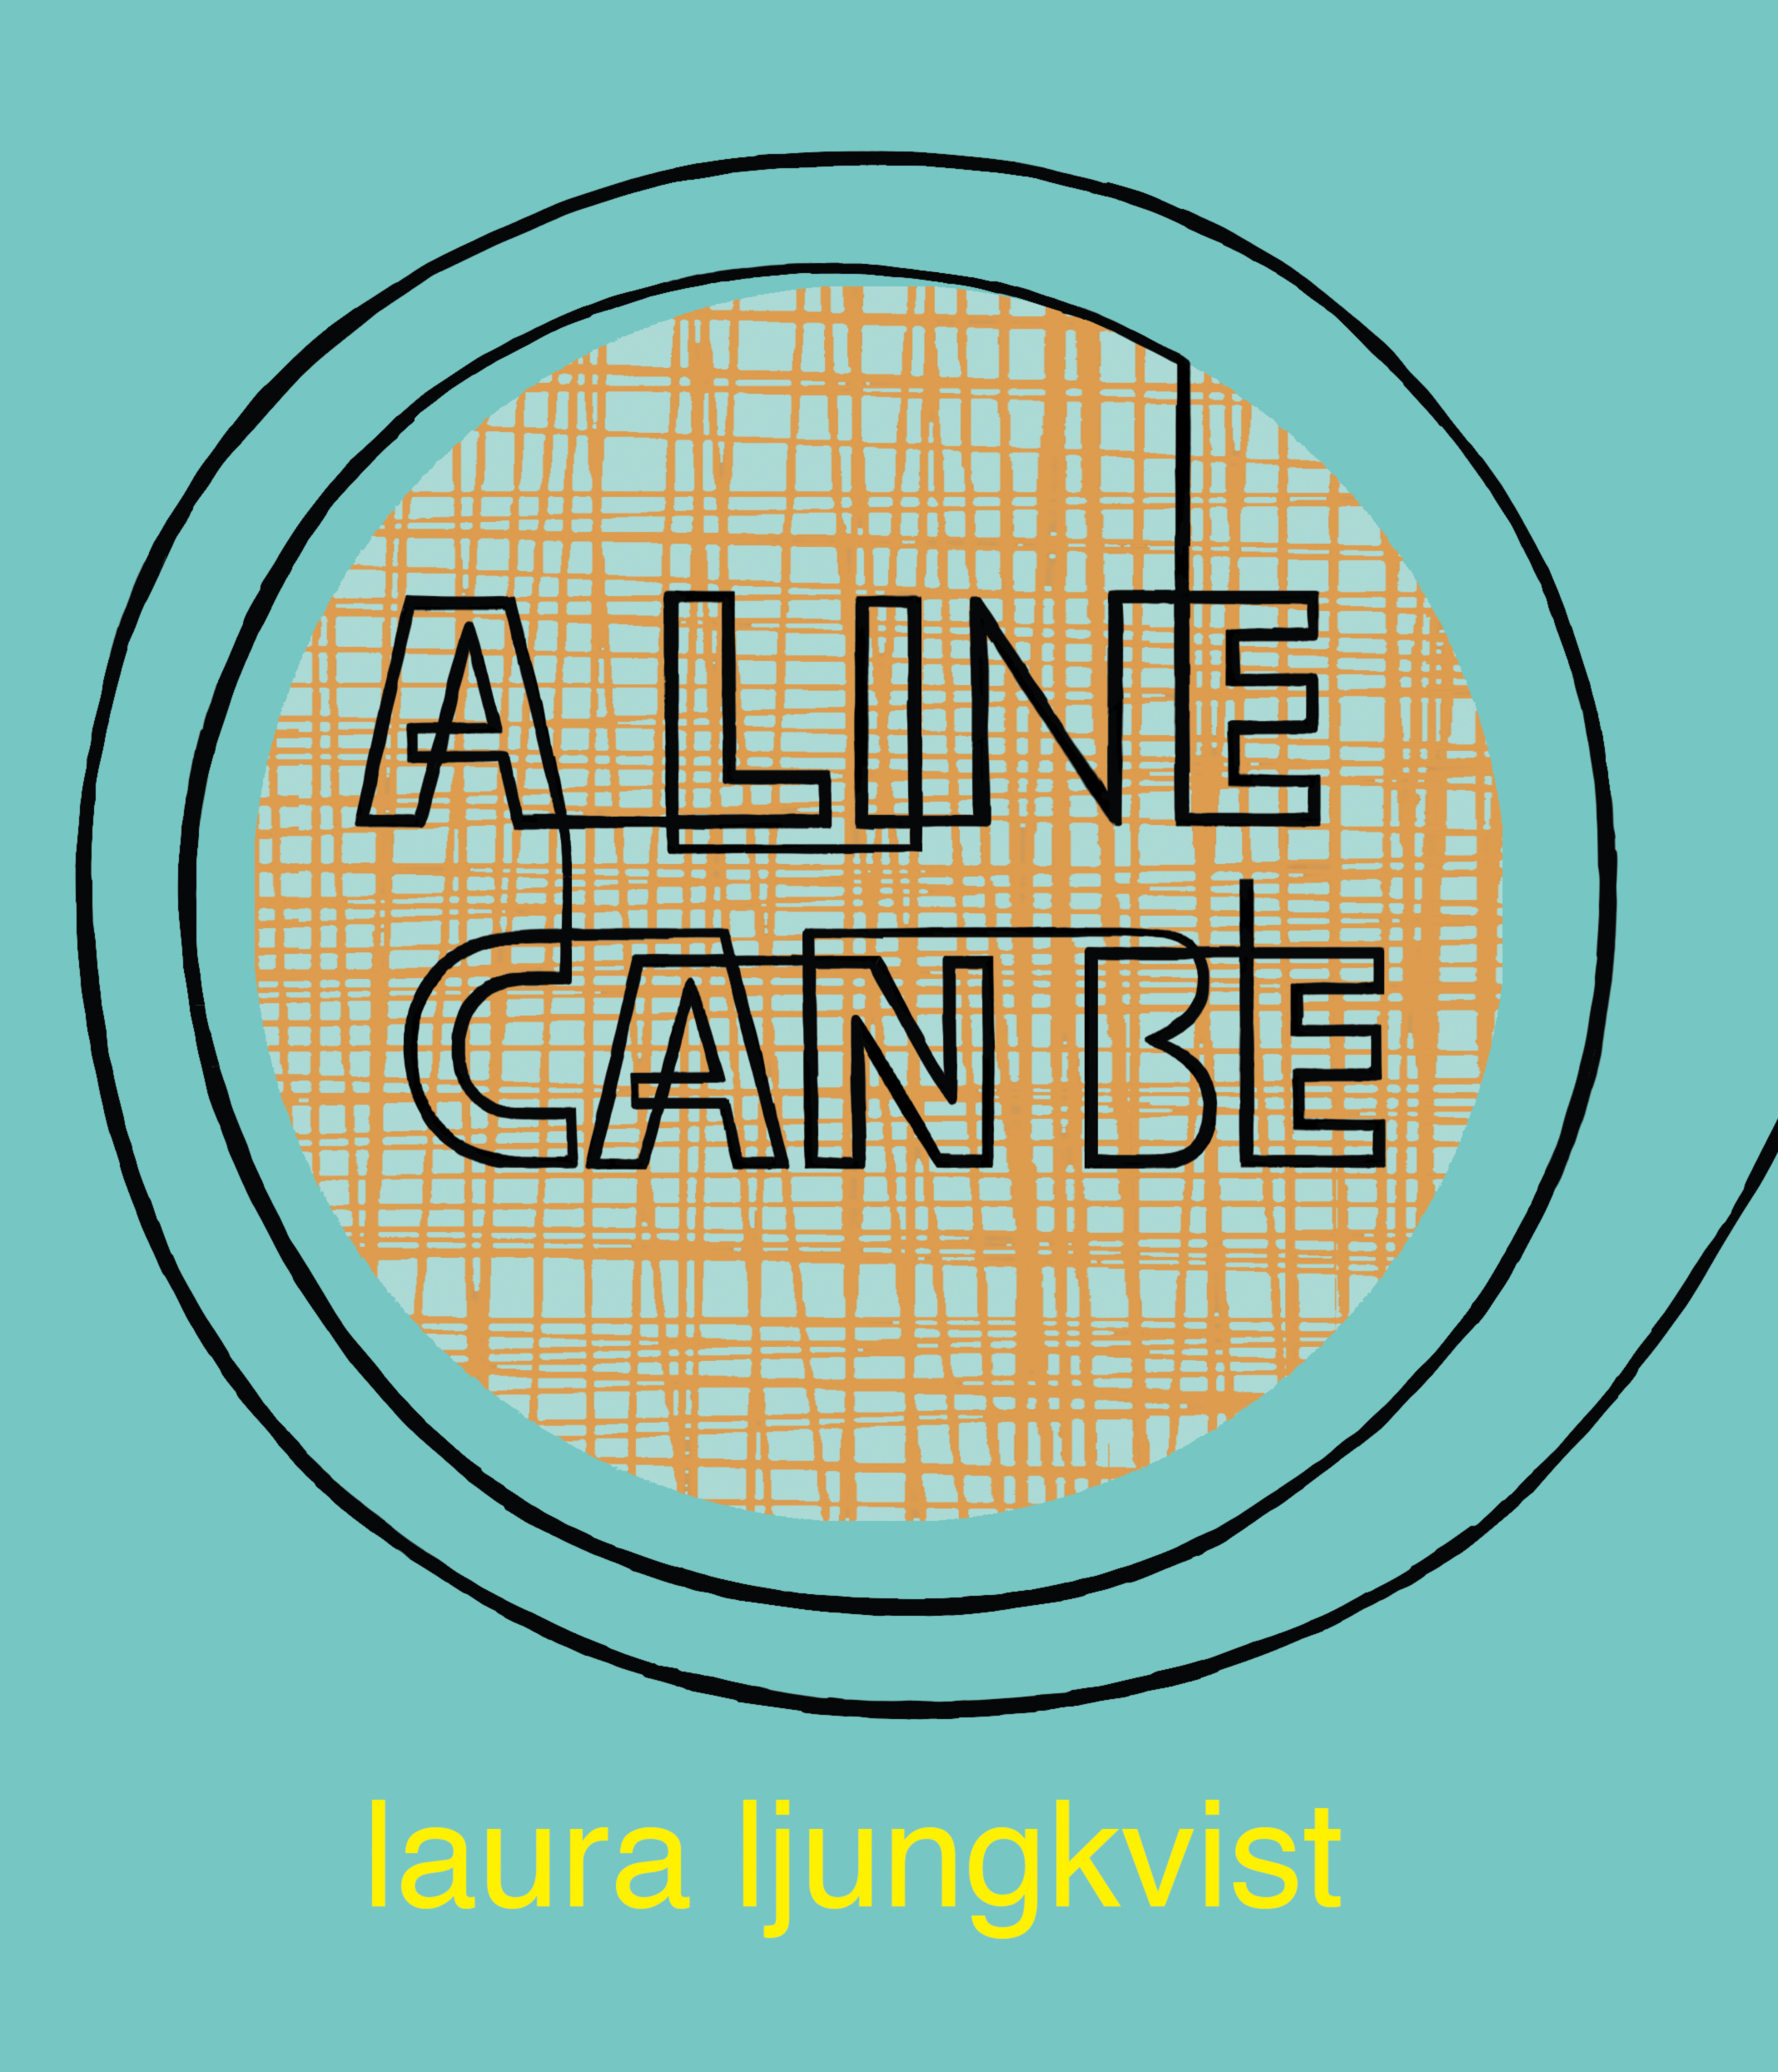 Sunday Story Time with Laura Ljungkvist (author of A Line Can Be...)